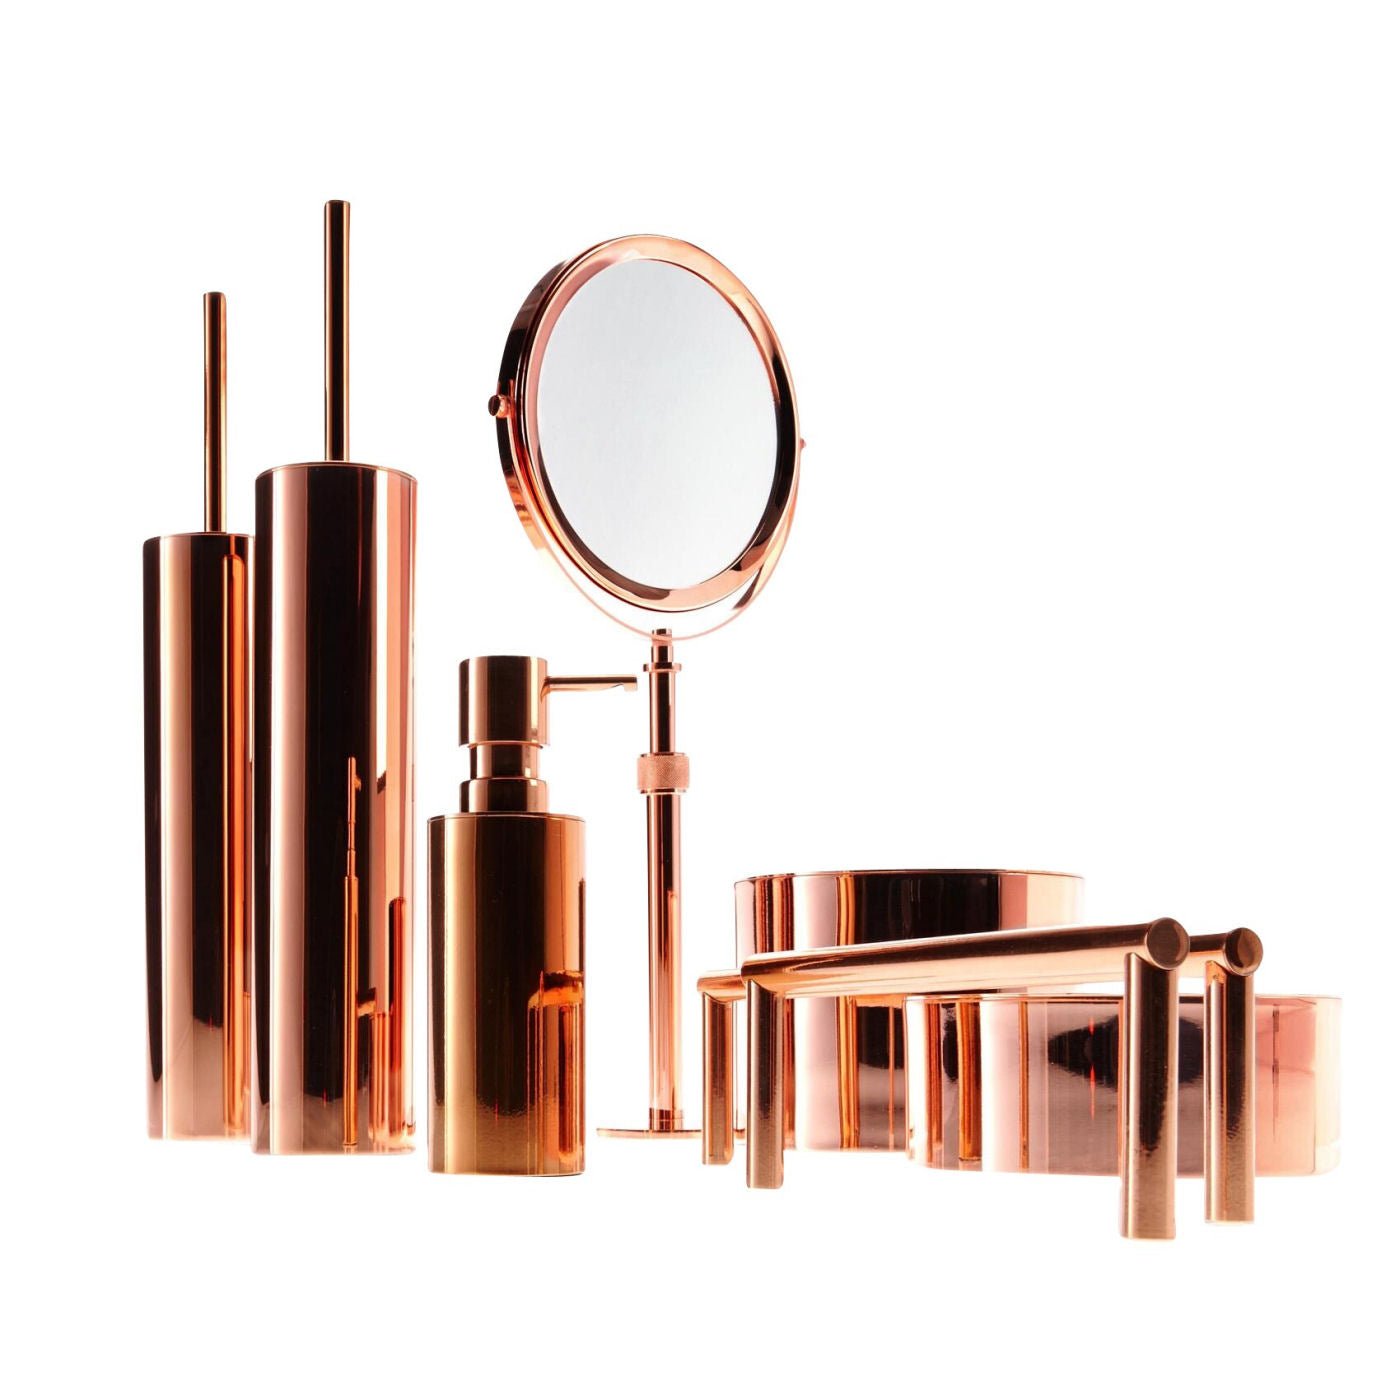 Bathroom Shelf in Rose Gold by Decor Walther - |VESIMI Design| Luxury Bathrooms and Home Decor